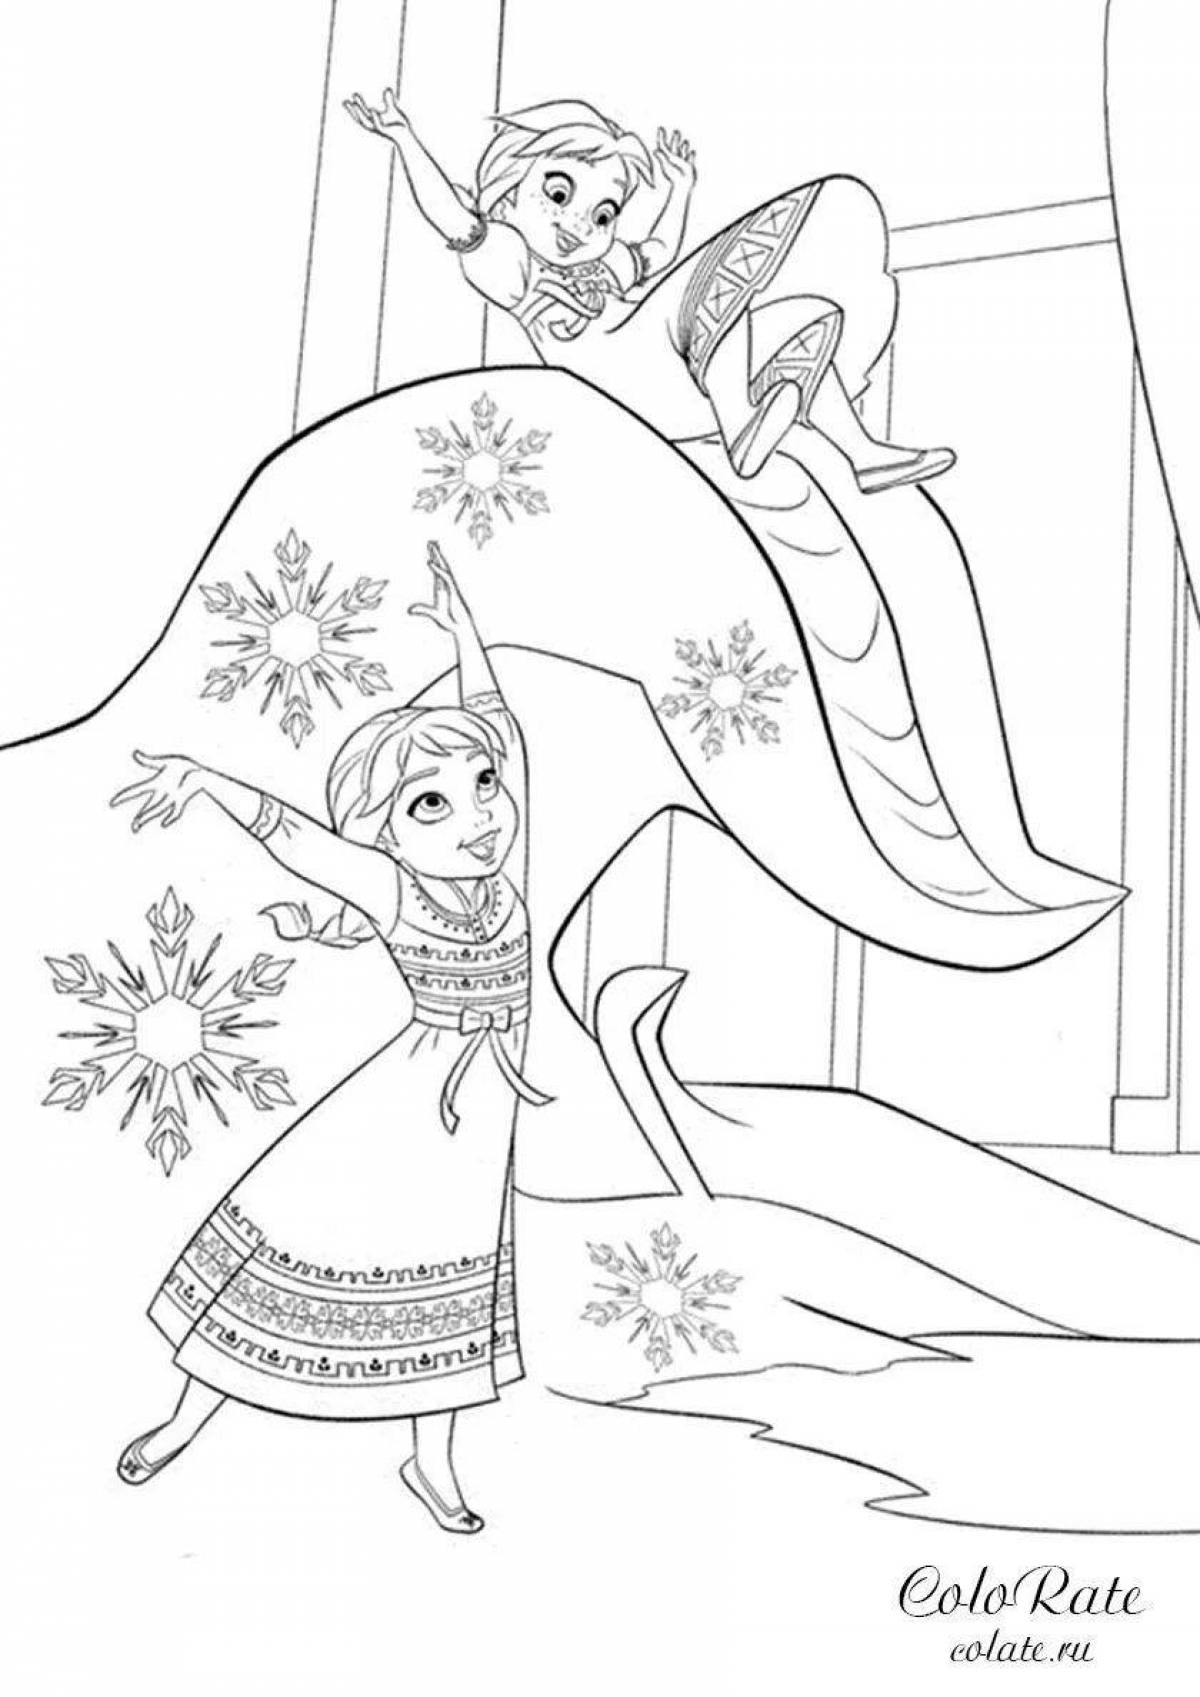 Elsa and anna small amazing coloring book